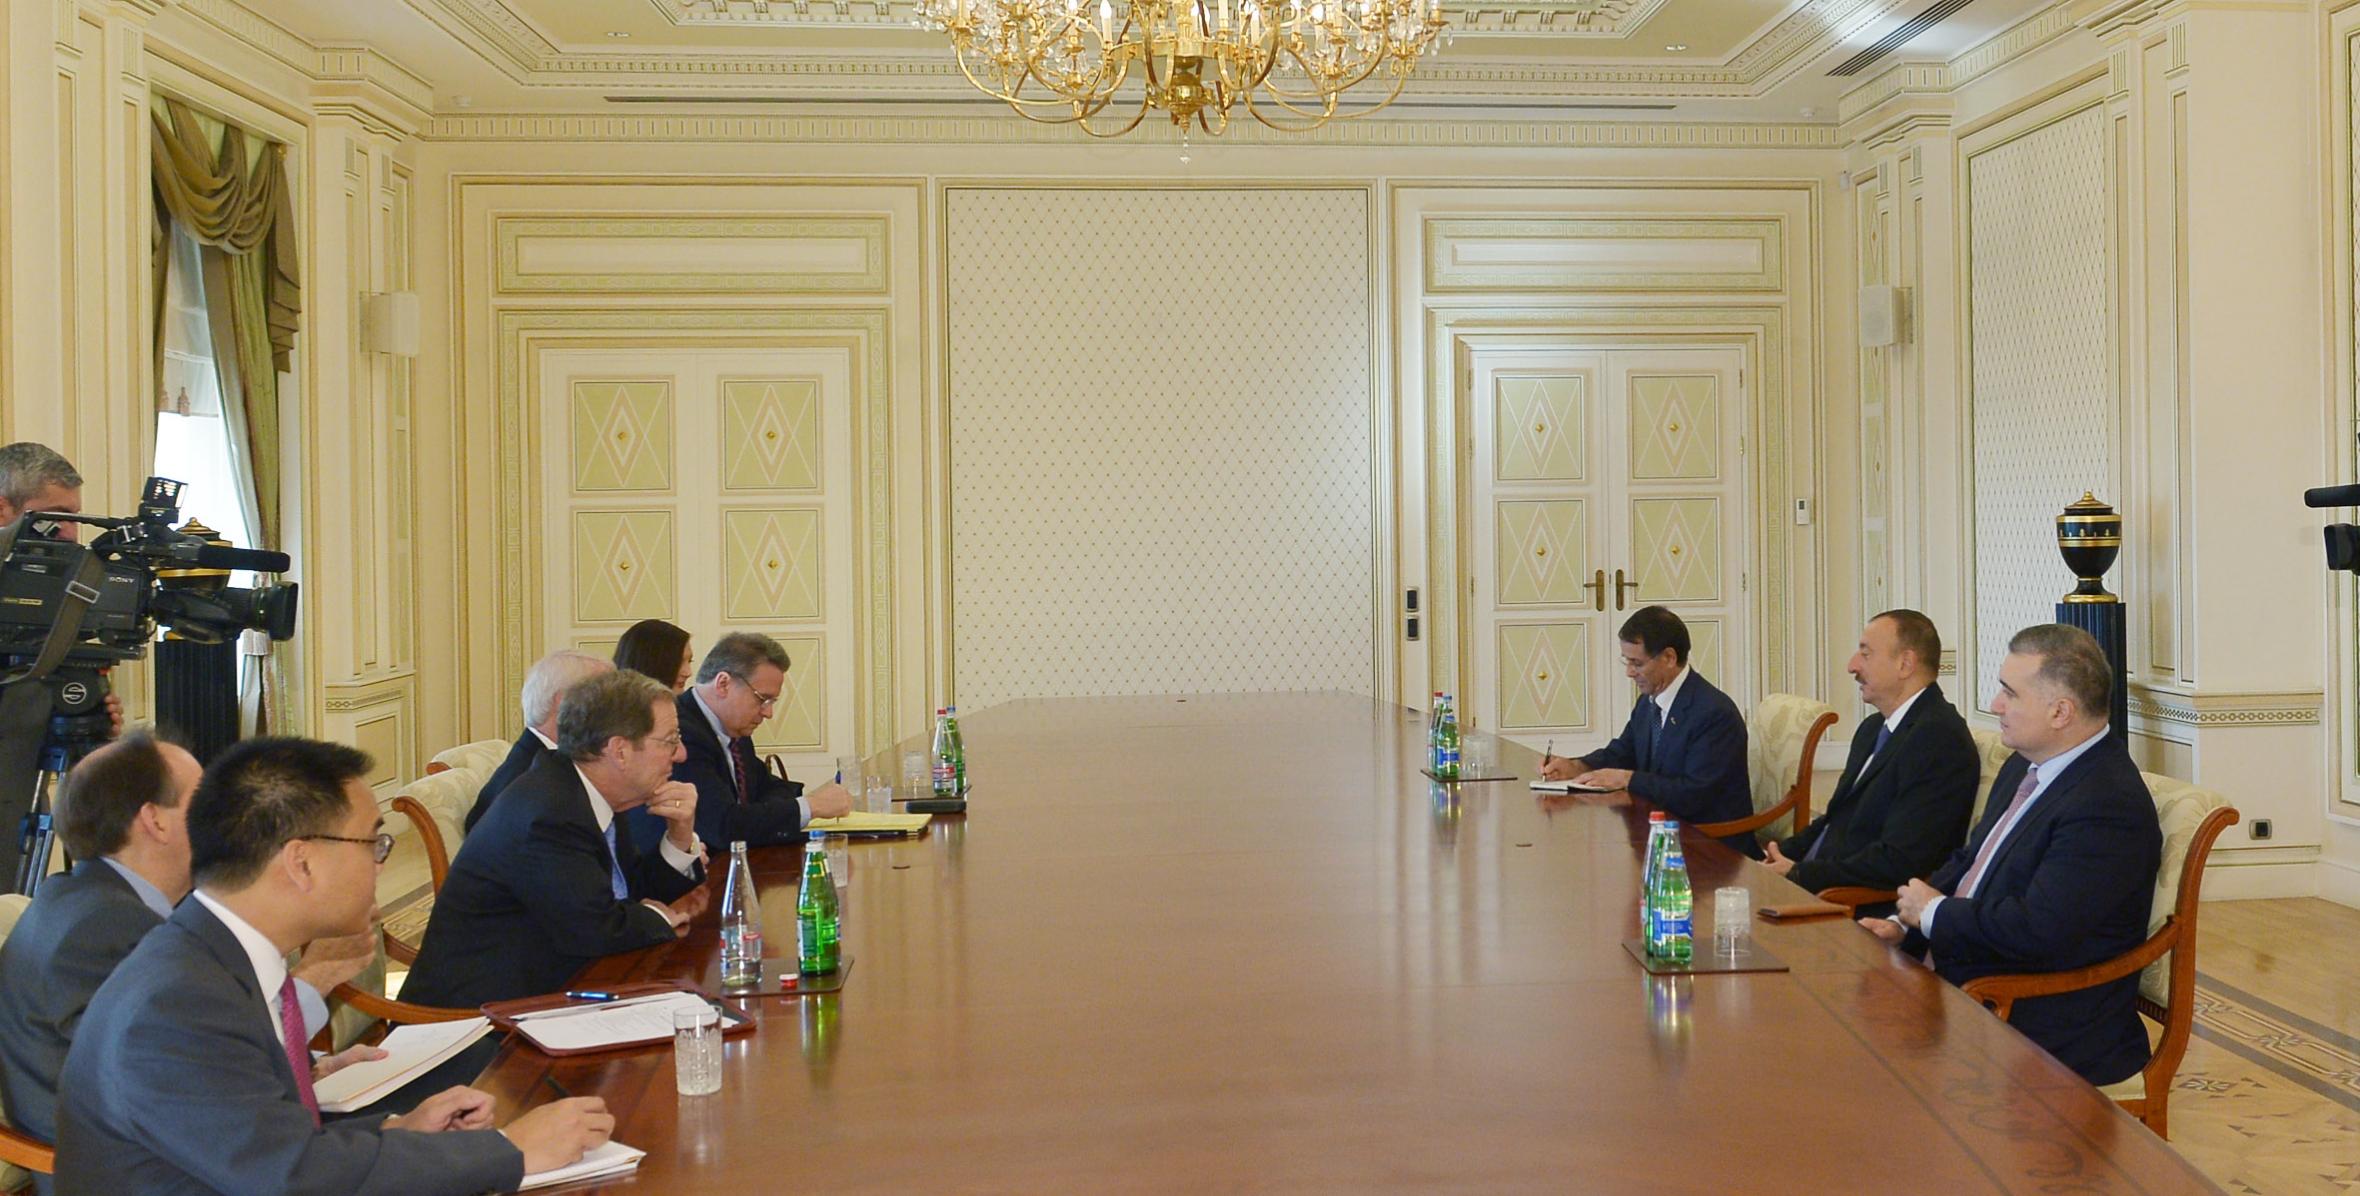 Ilham Aliyev received a US delegation led by the Senator and the Congressman